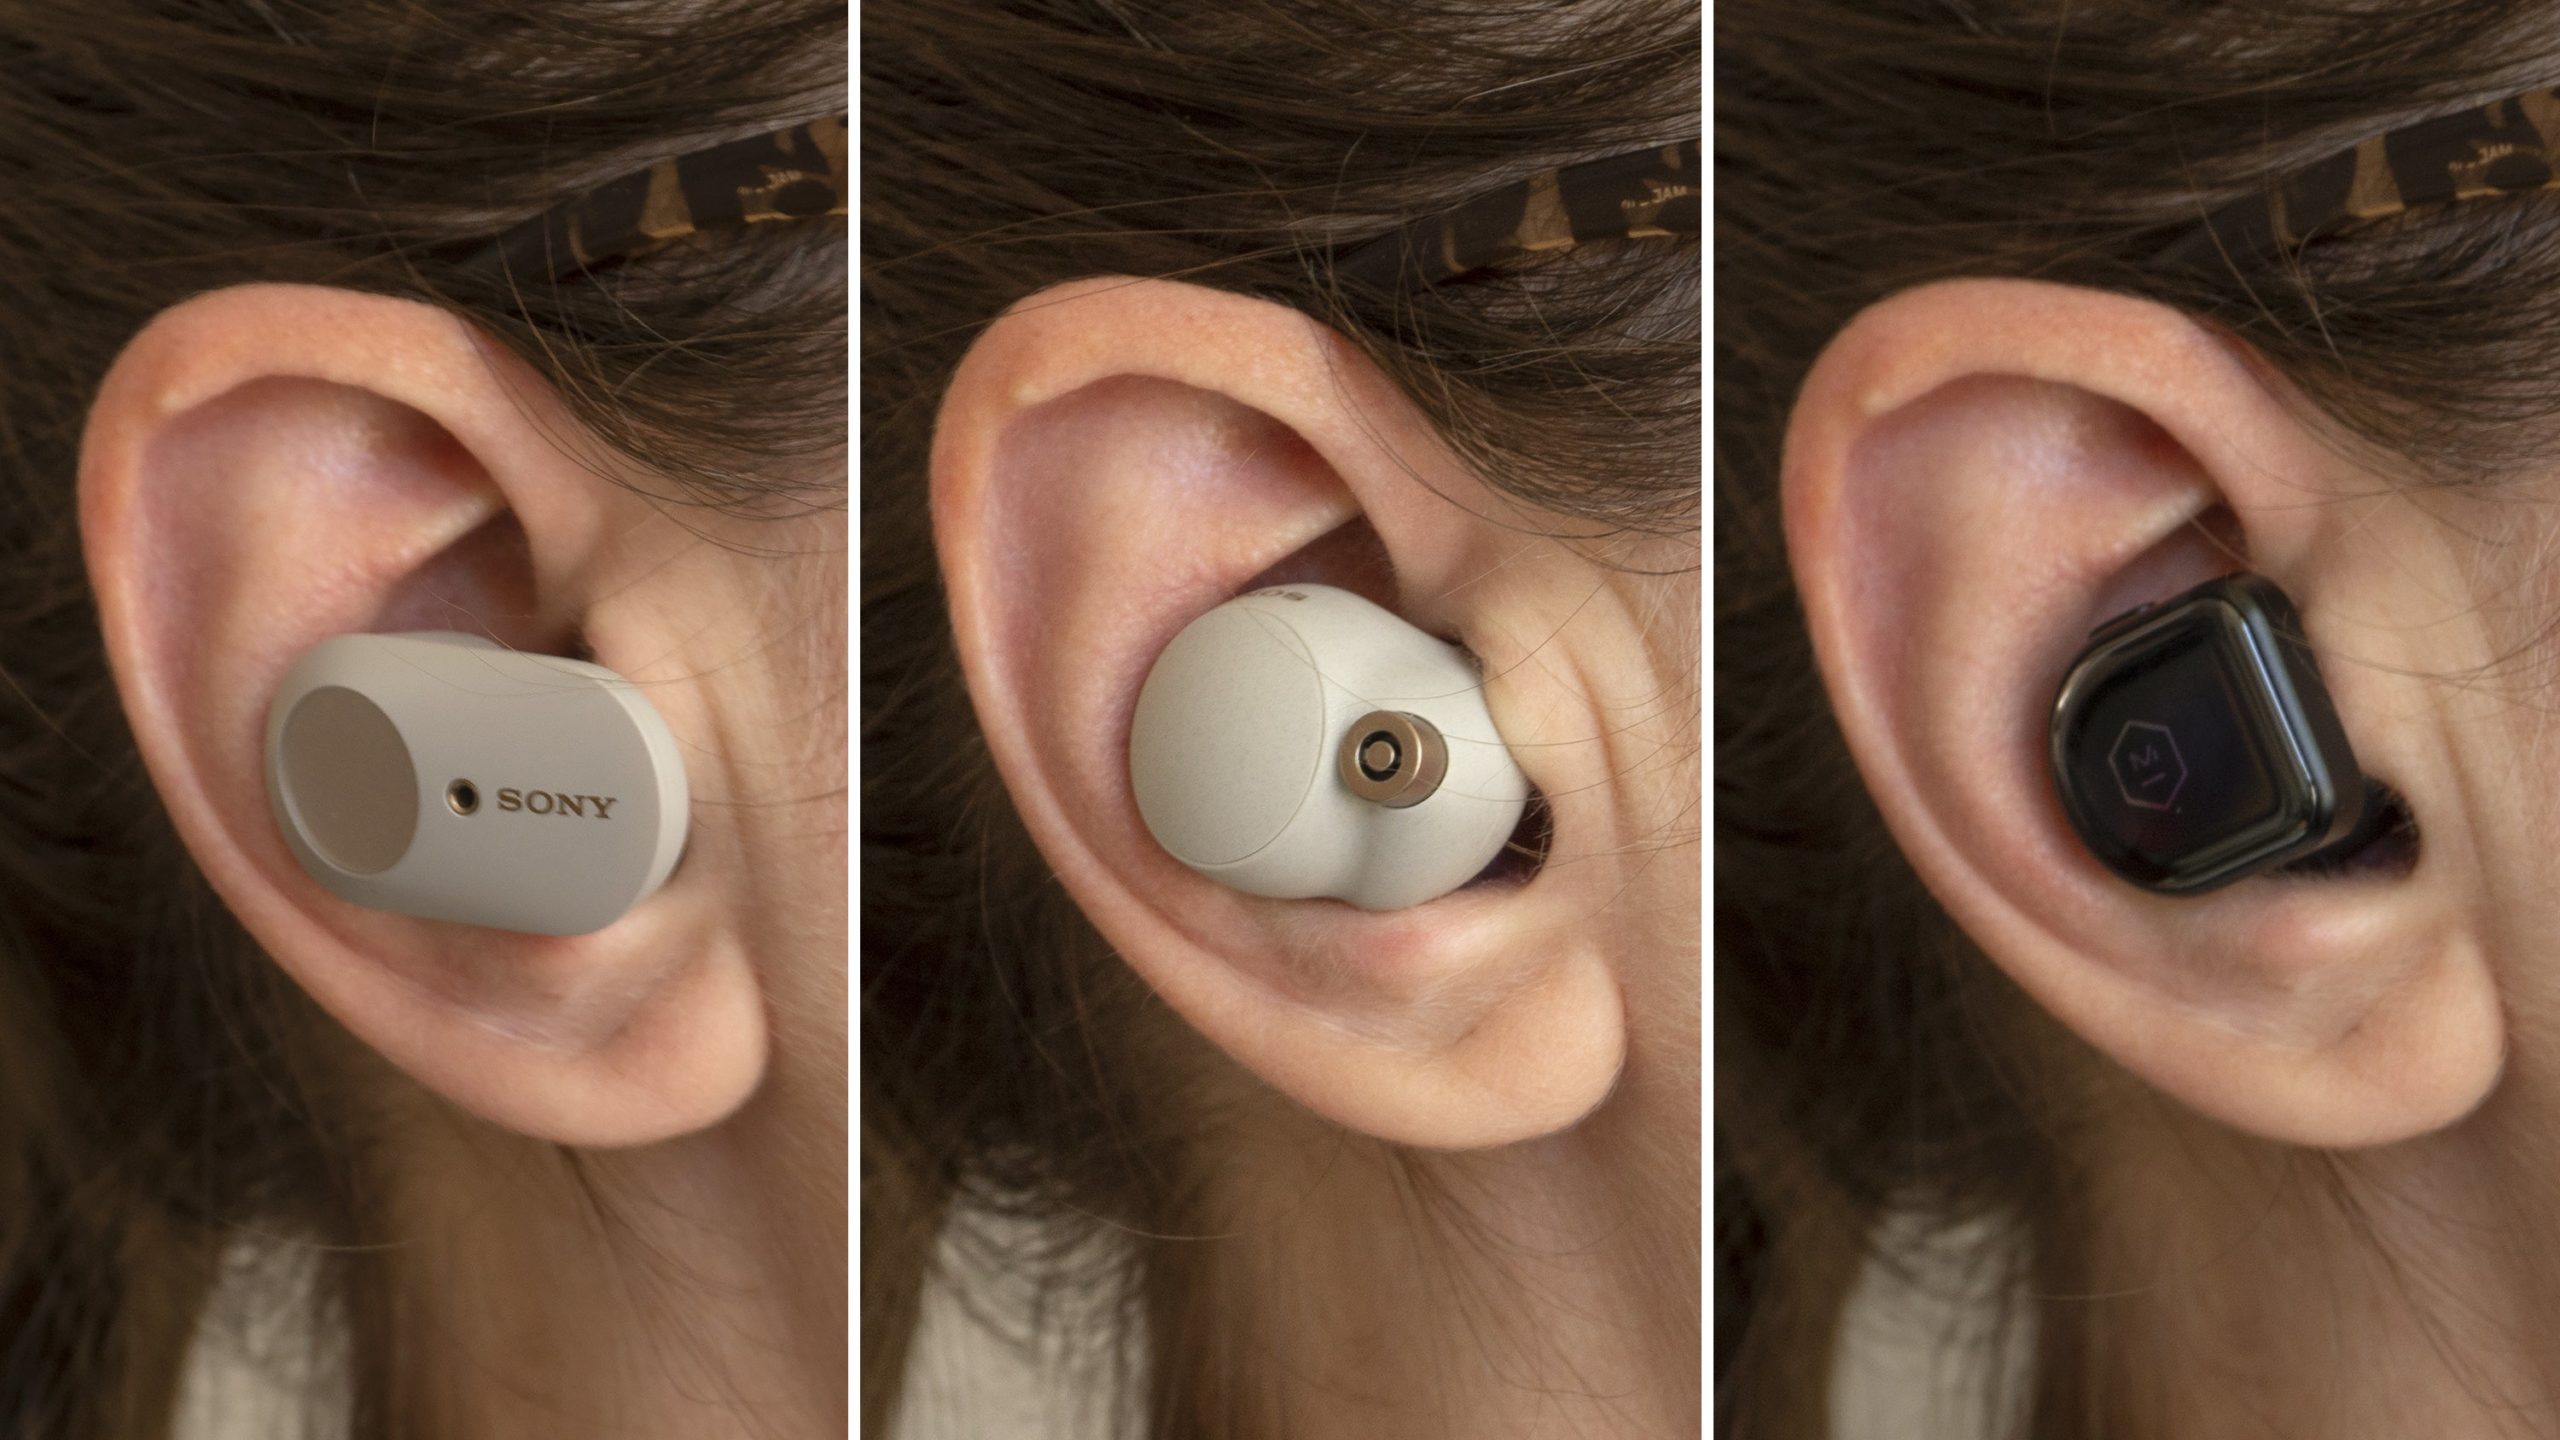 'The Sony WF-1000XM3 (left) and Sony WF-1000XM4 (centre) earbuds do tend to stick out of your ear more than options like Master & Dynamic's MW08s (right). (Photo: Andrew Liszewski/Gizmodo)